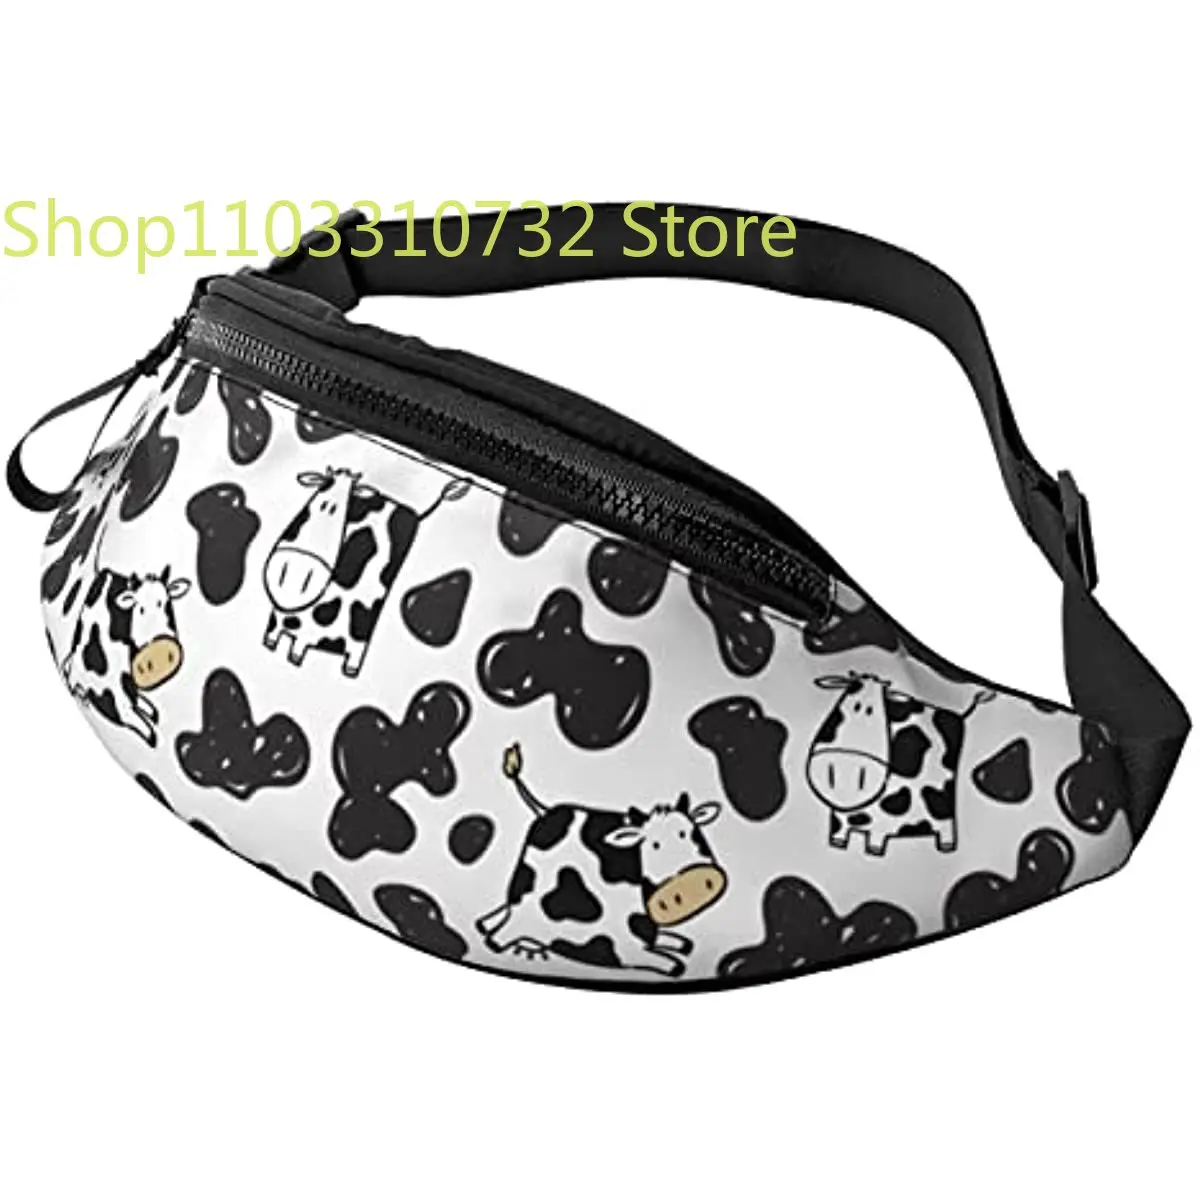 

Cow Print Fanny Pack for Men Women Adjustable Belt Bag Casual Waist Pack for Travel Party Festival Hiking Running Cycling